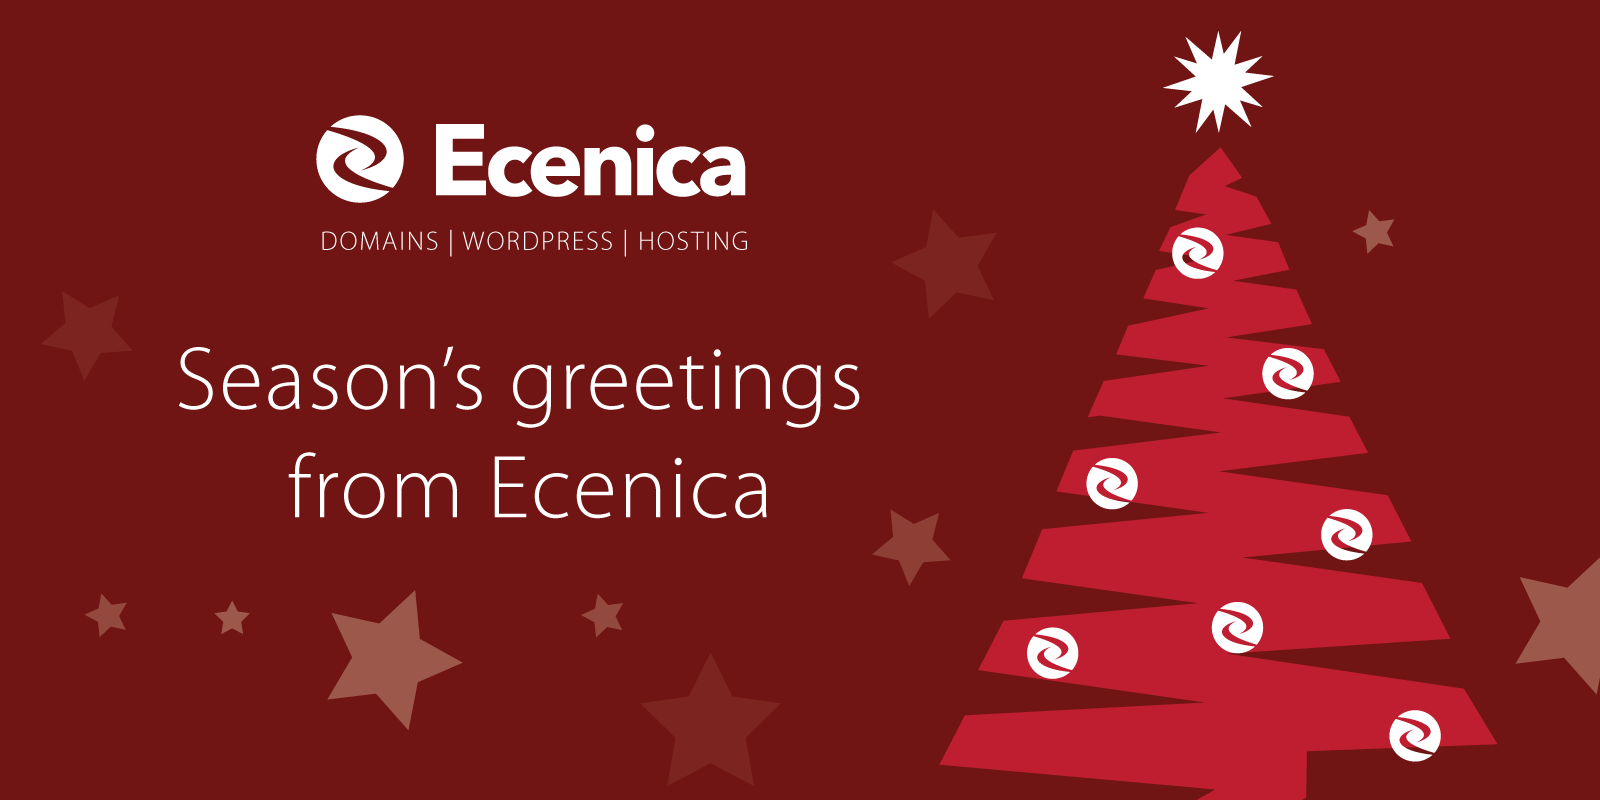 Seasons greetings from Ecenica this Christmas and New Year